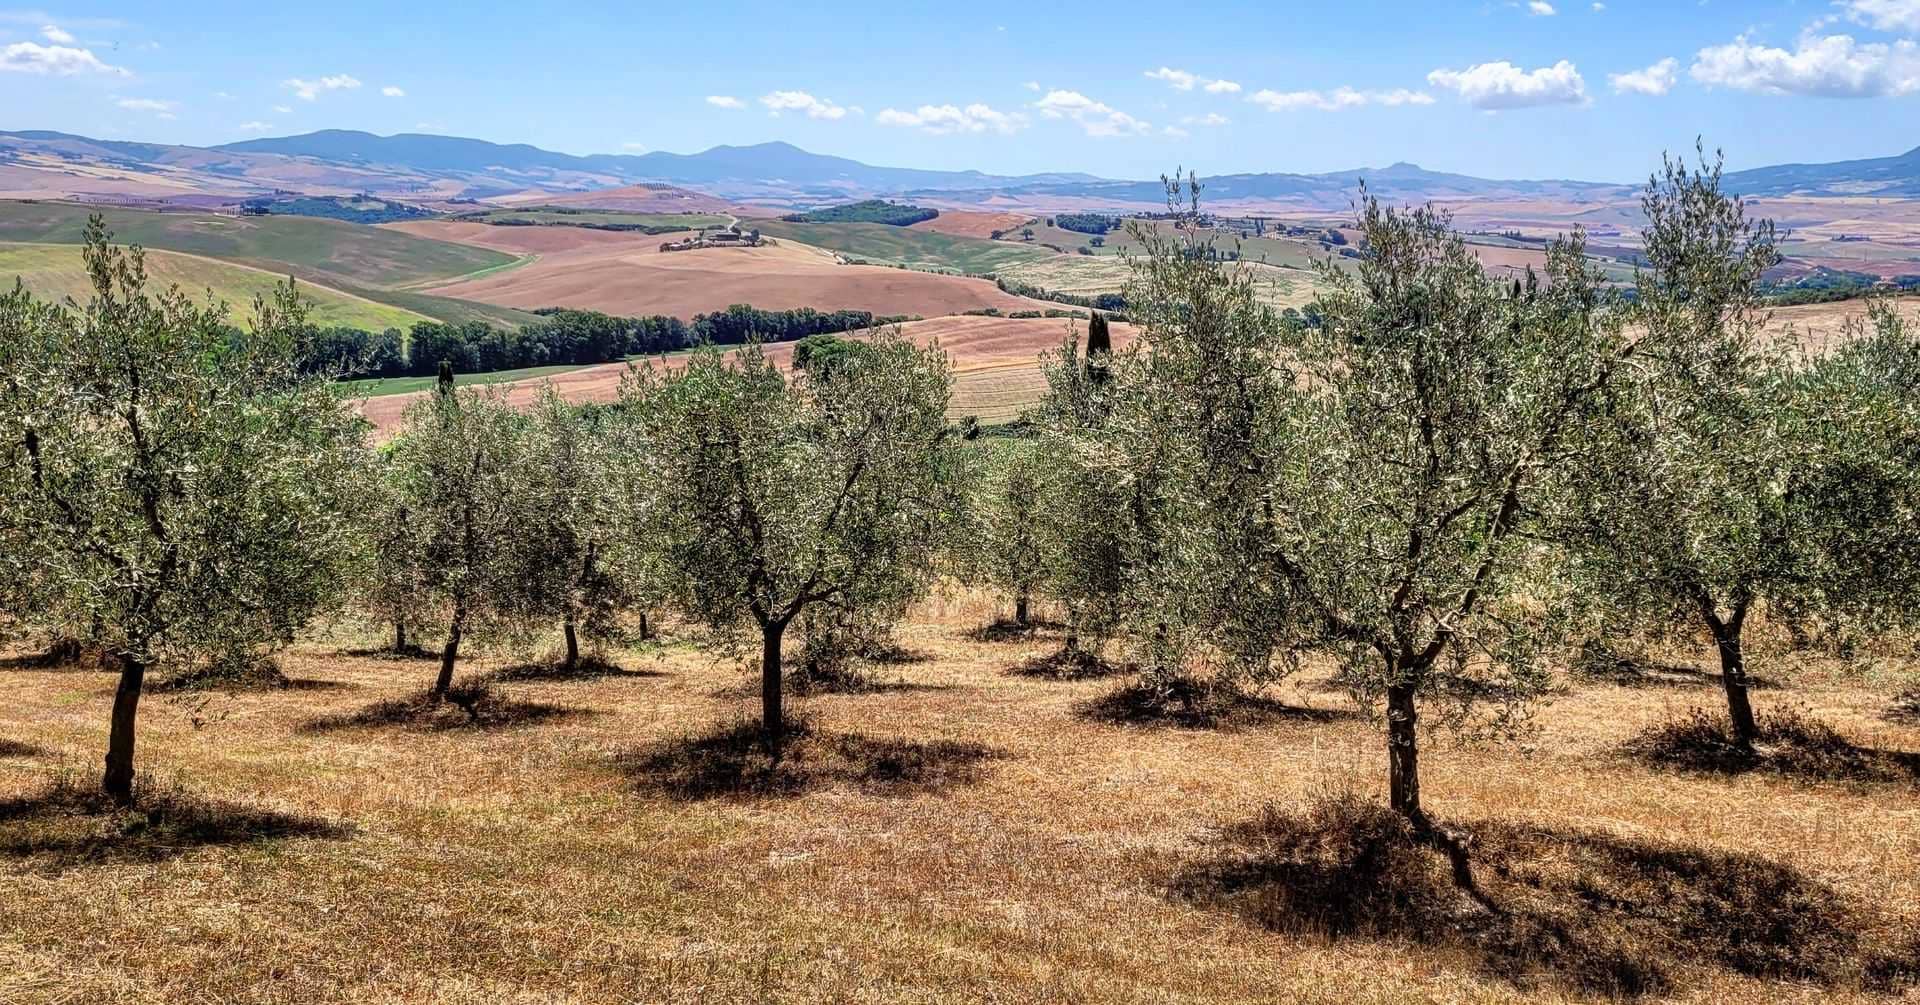 europe-production-business-in-tuscany-farmers-cope-with-climate-challenges-while-borning-for-top-quality-olive-oil-times